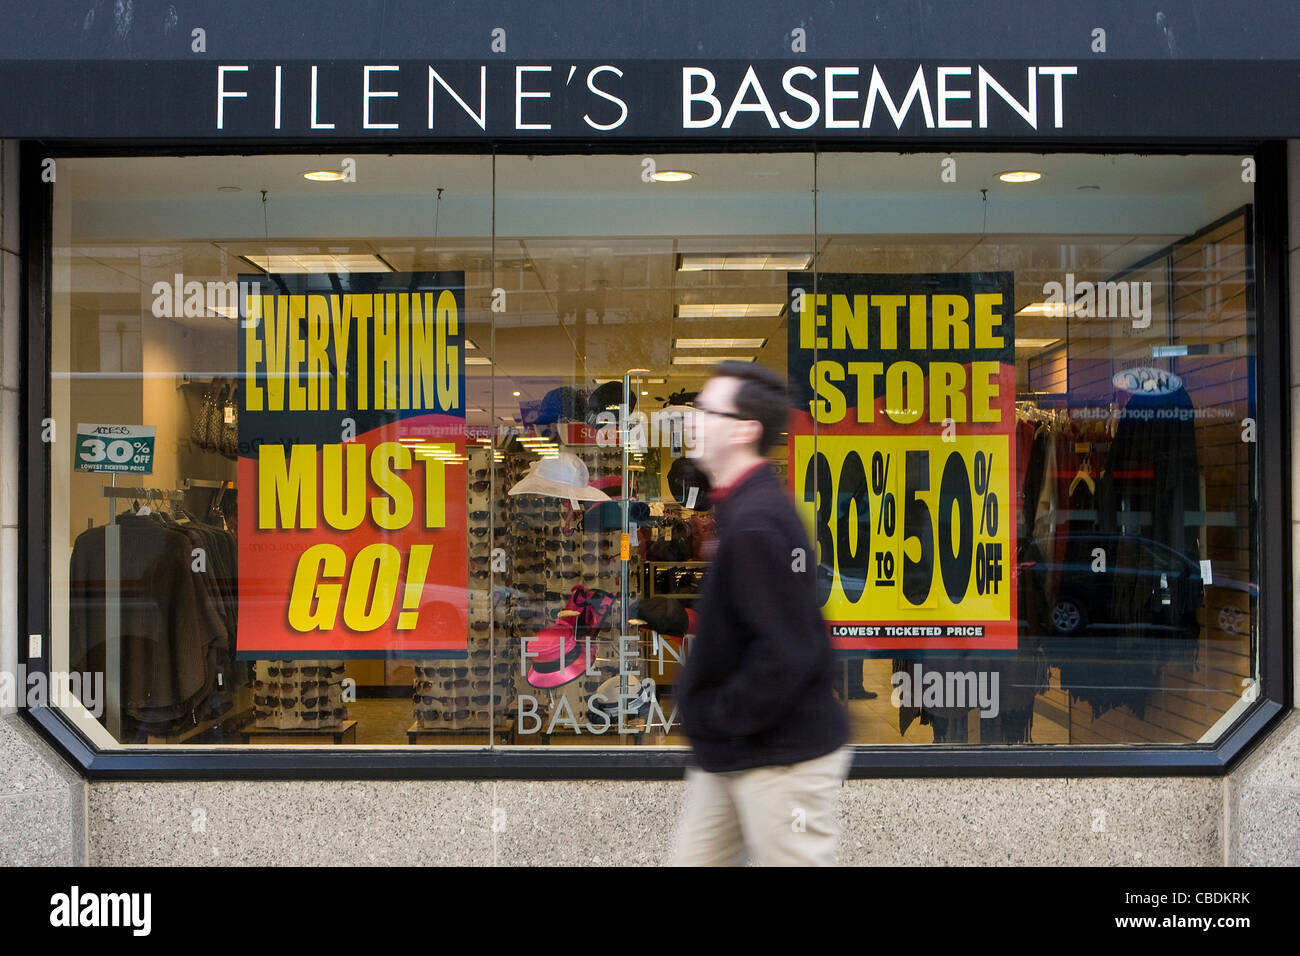 A Filenes Basement Store Going Out Of Business Sale Stock Photo